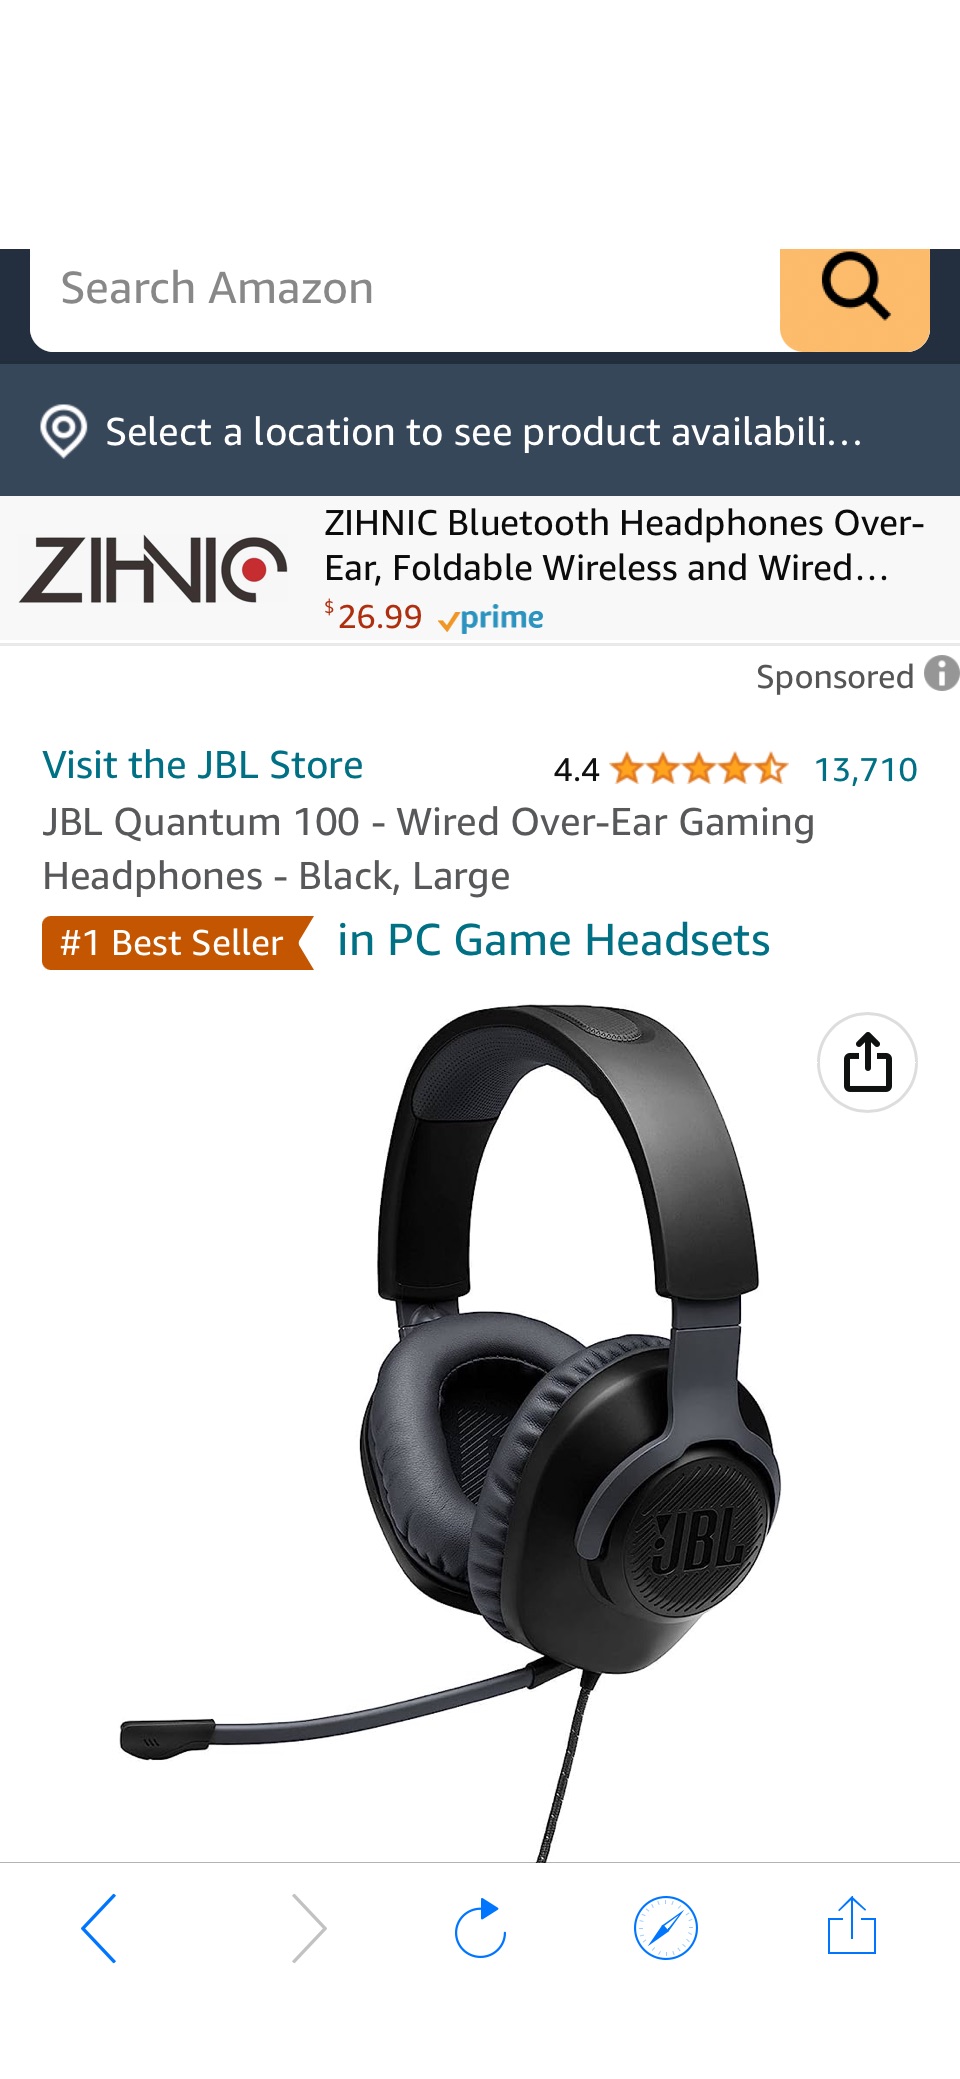 Amazon.com: JBL Quantum 100 - Wired Over-Ear Gaming Headphones - Black, Large : Video Games原价39.95